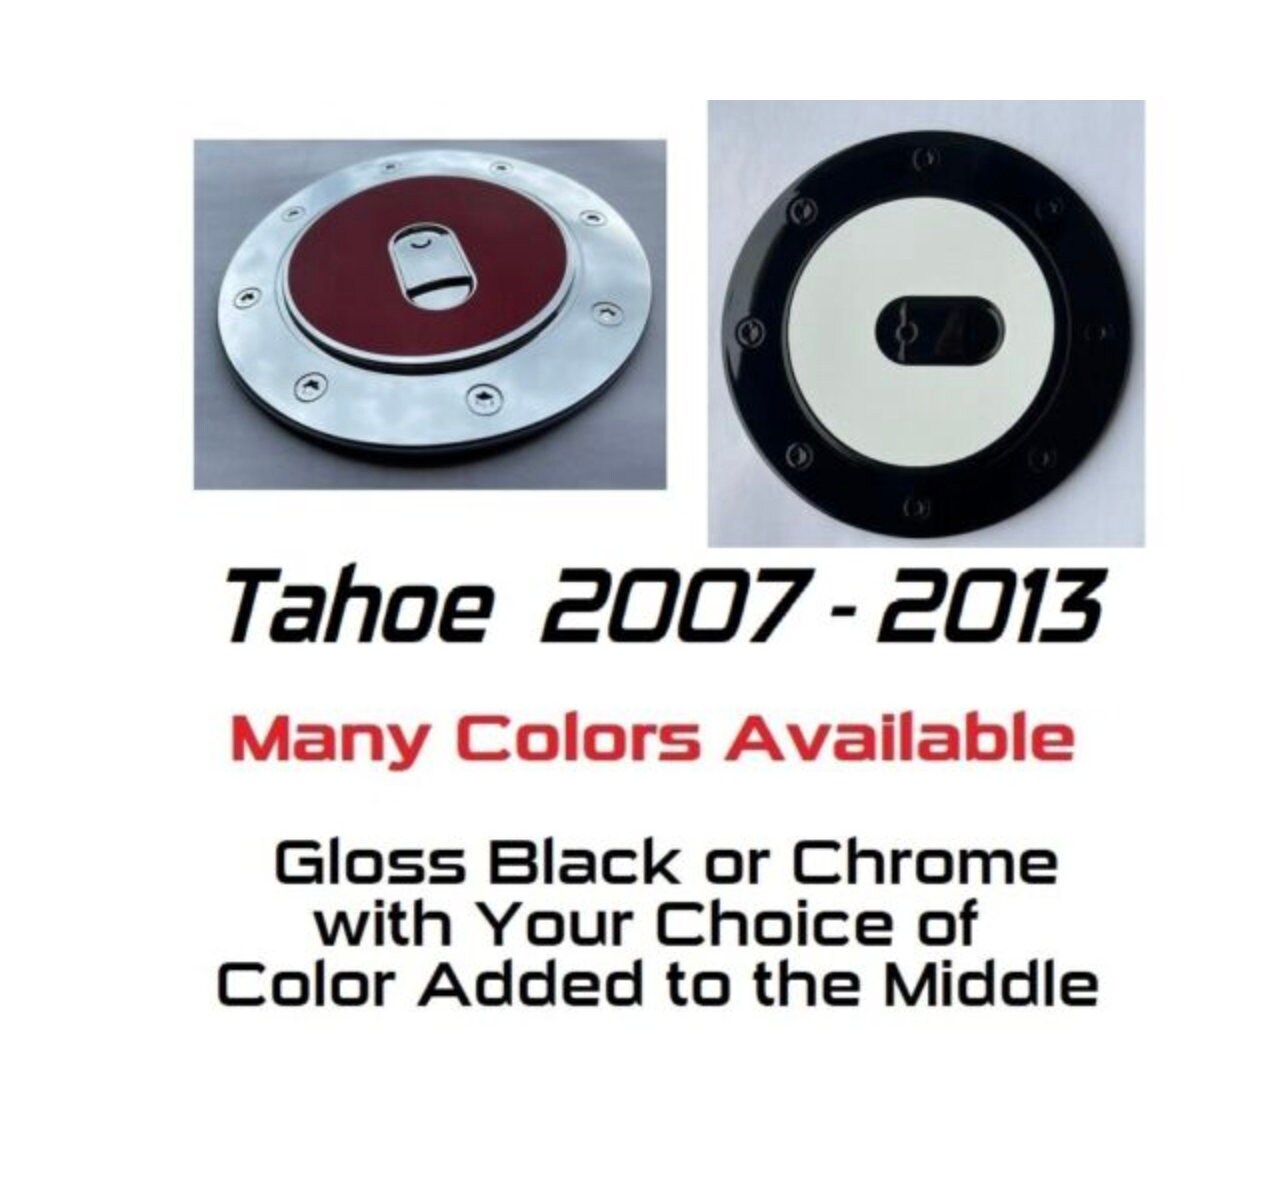 Custom Black OR Chrome Gas Door Cover For the 2007 - 2013 Chevy Tahoe -- You Choose the Middle Color Insert